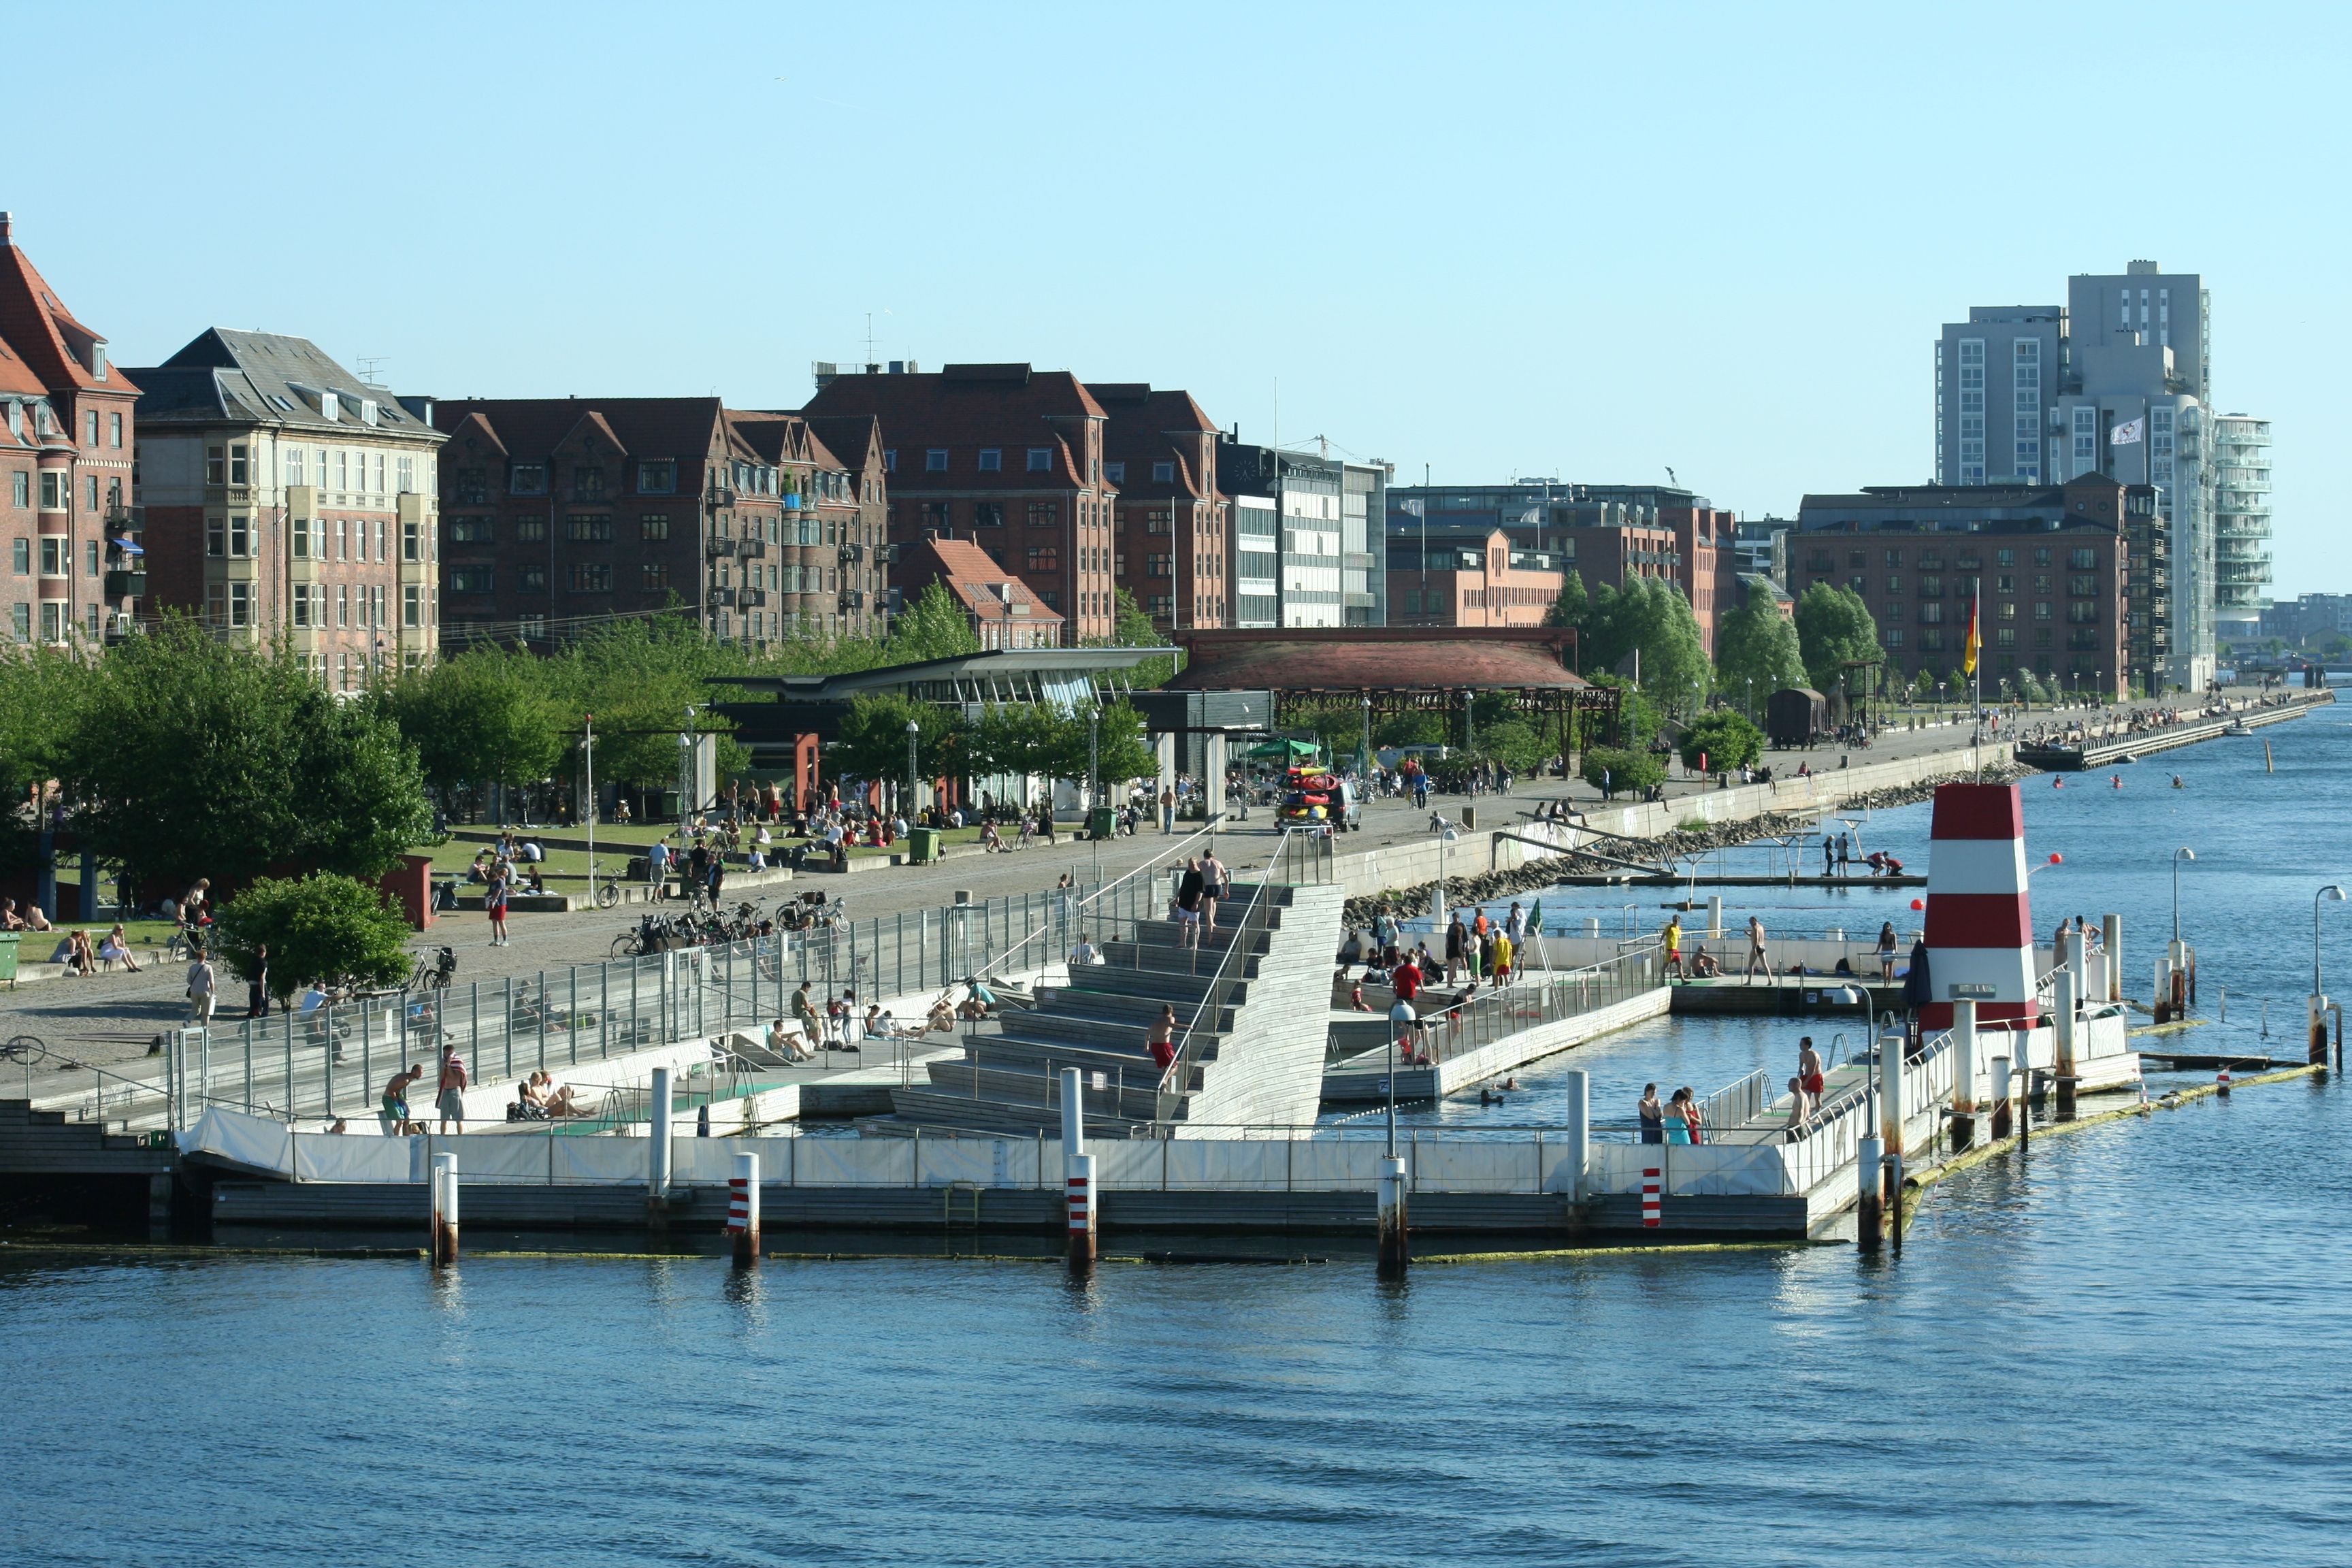 Swimmers face fines for taking a dip in Copenhagen Harbour outside the designated zones